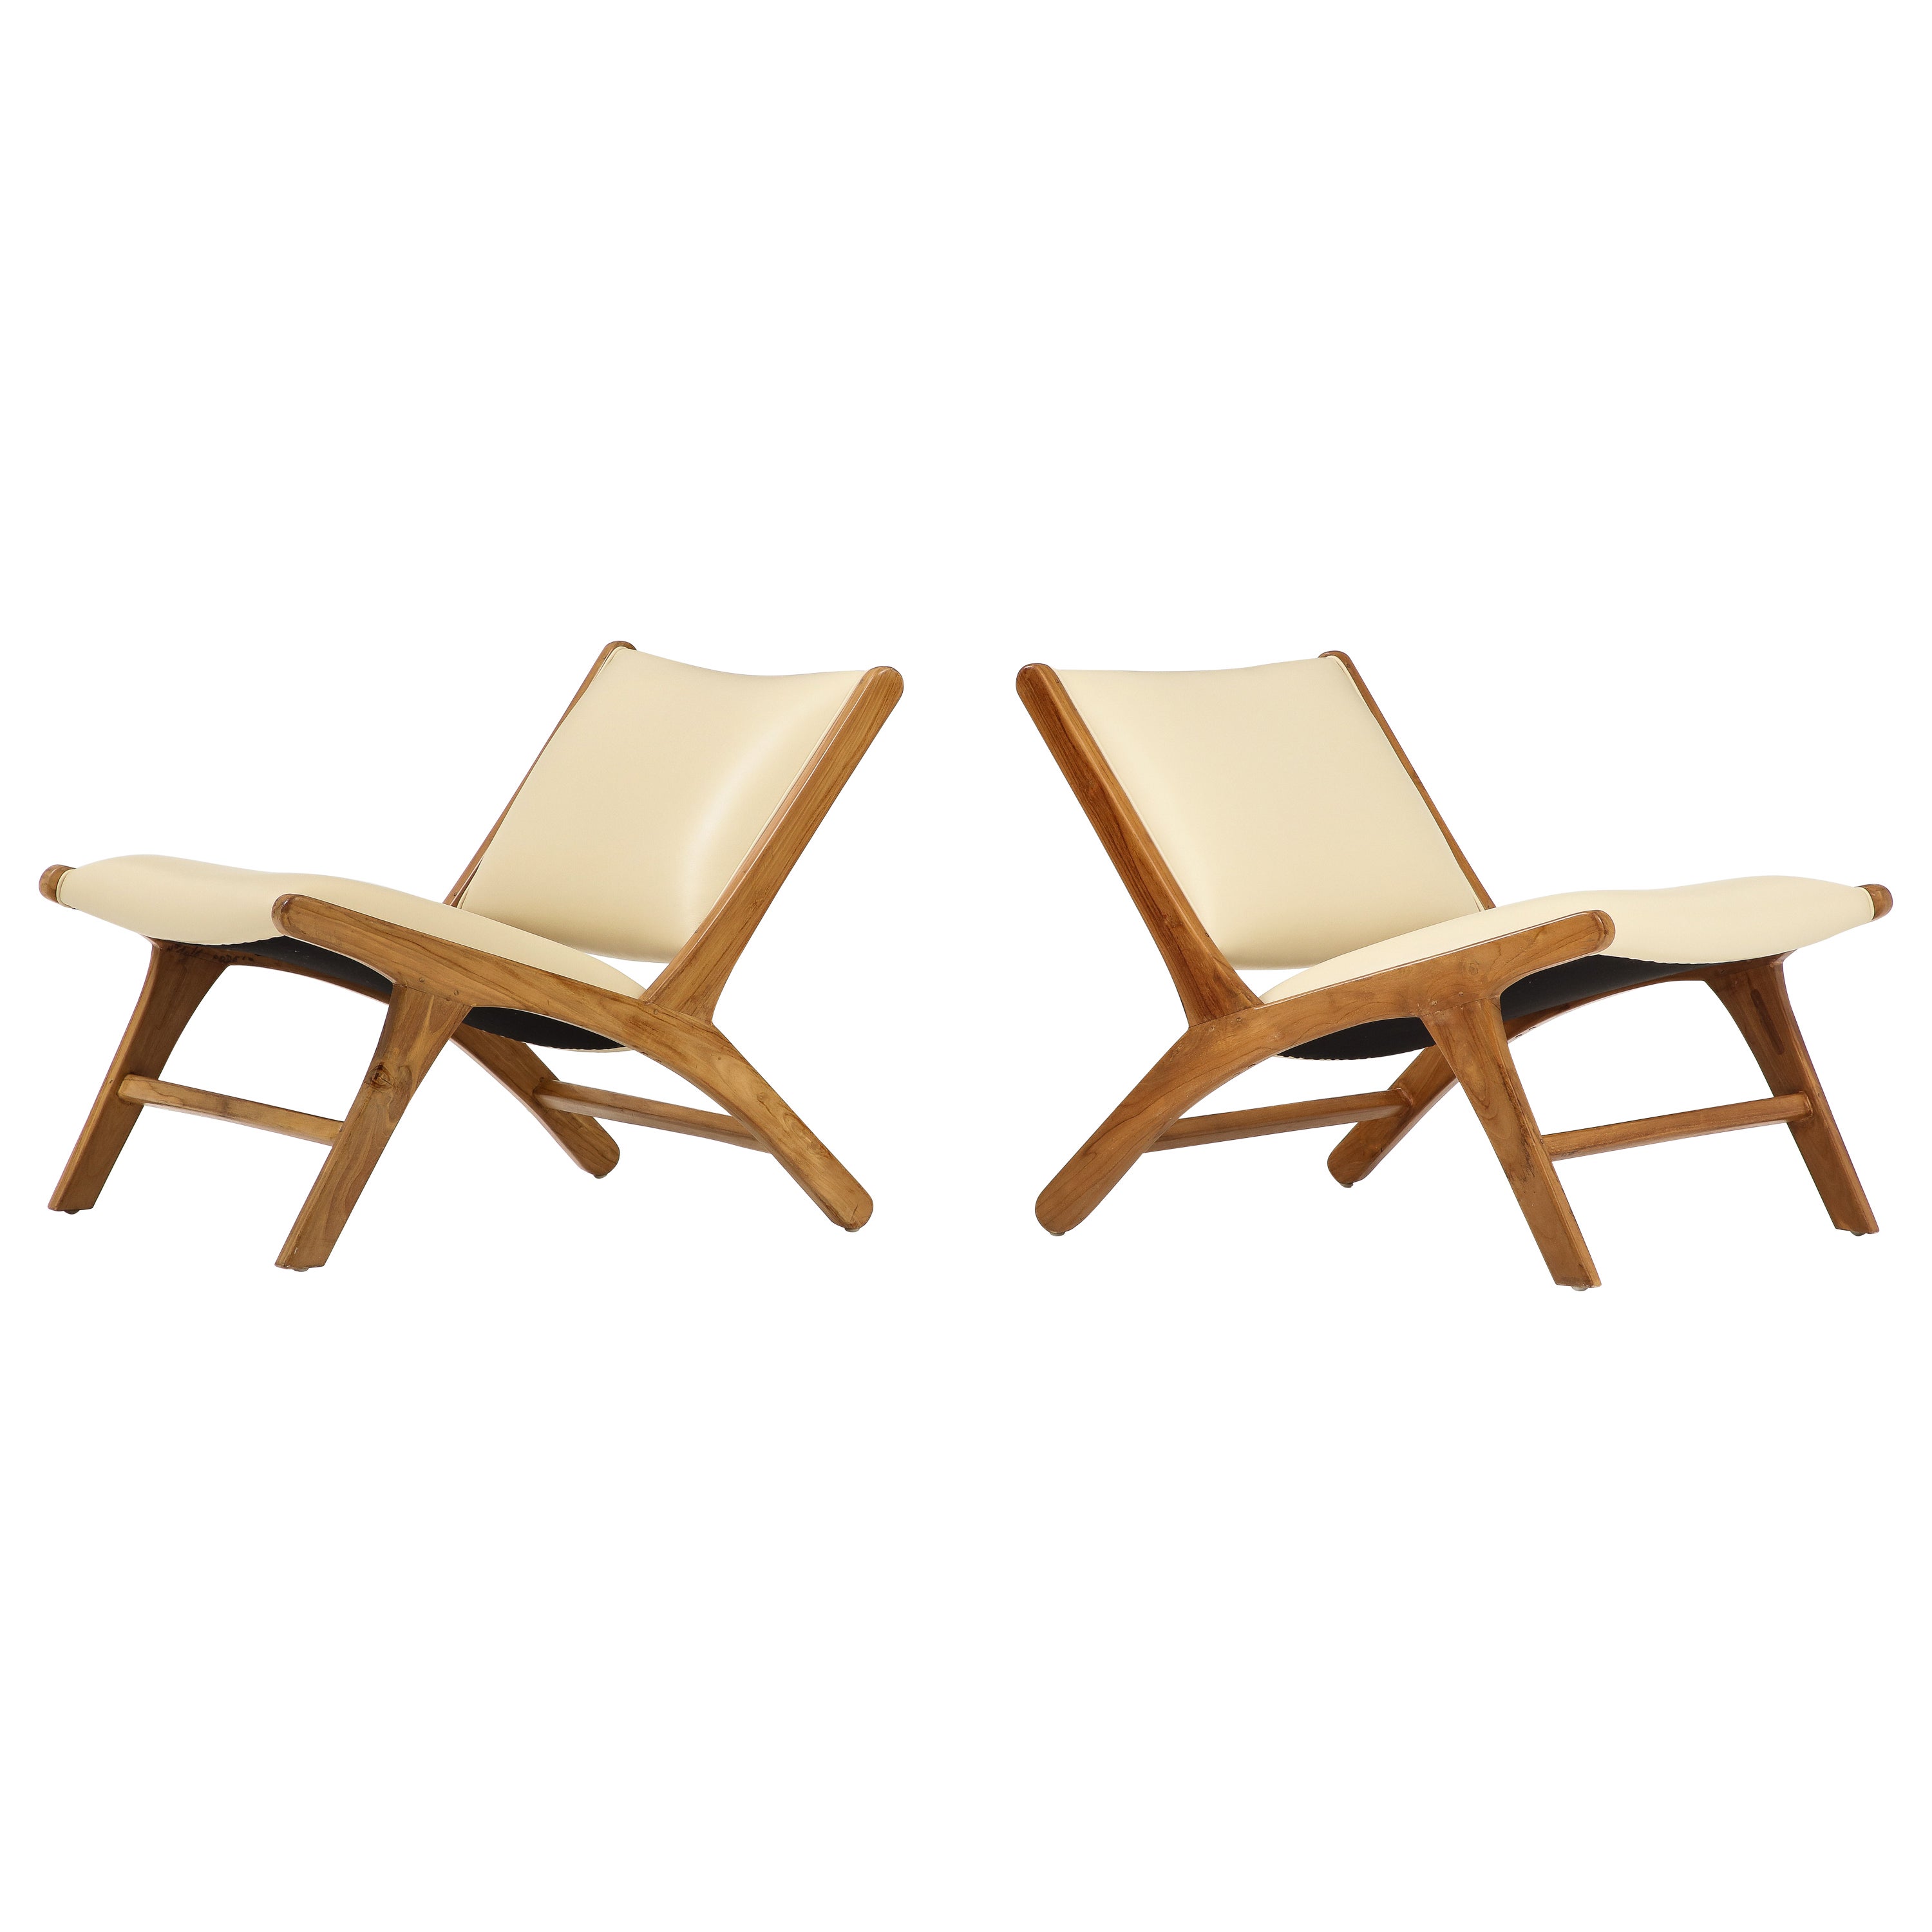 Olivier De Schrijver Pair of Oak and Leather Chairs,  Signed & Numbered For Sale